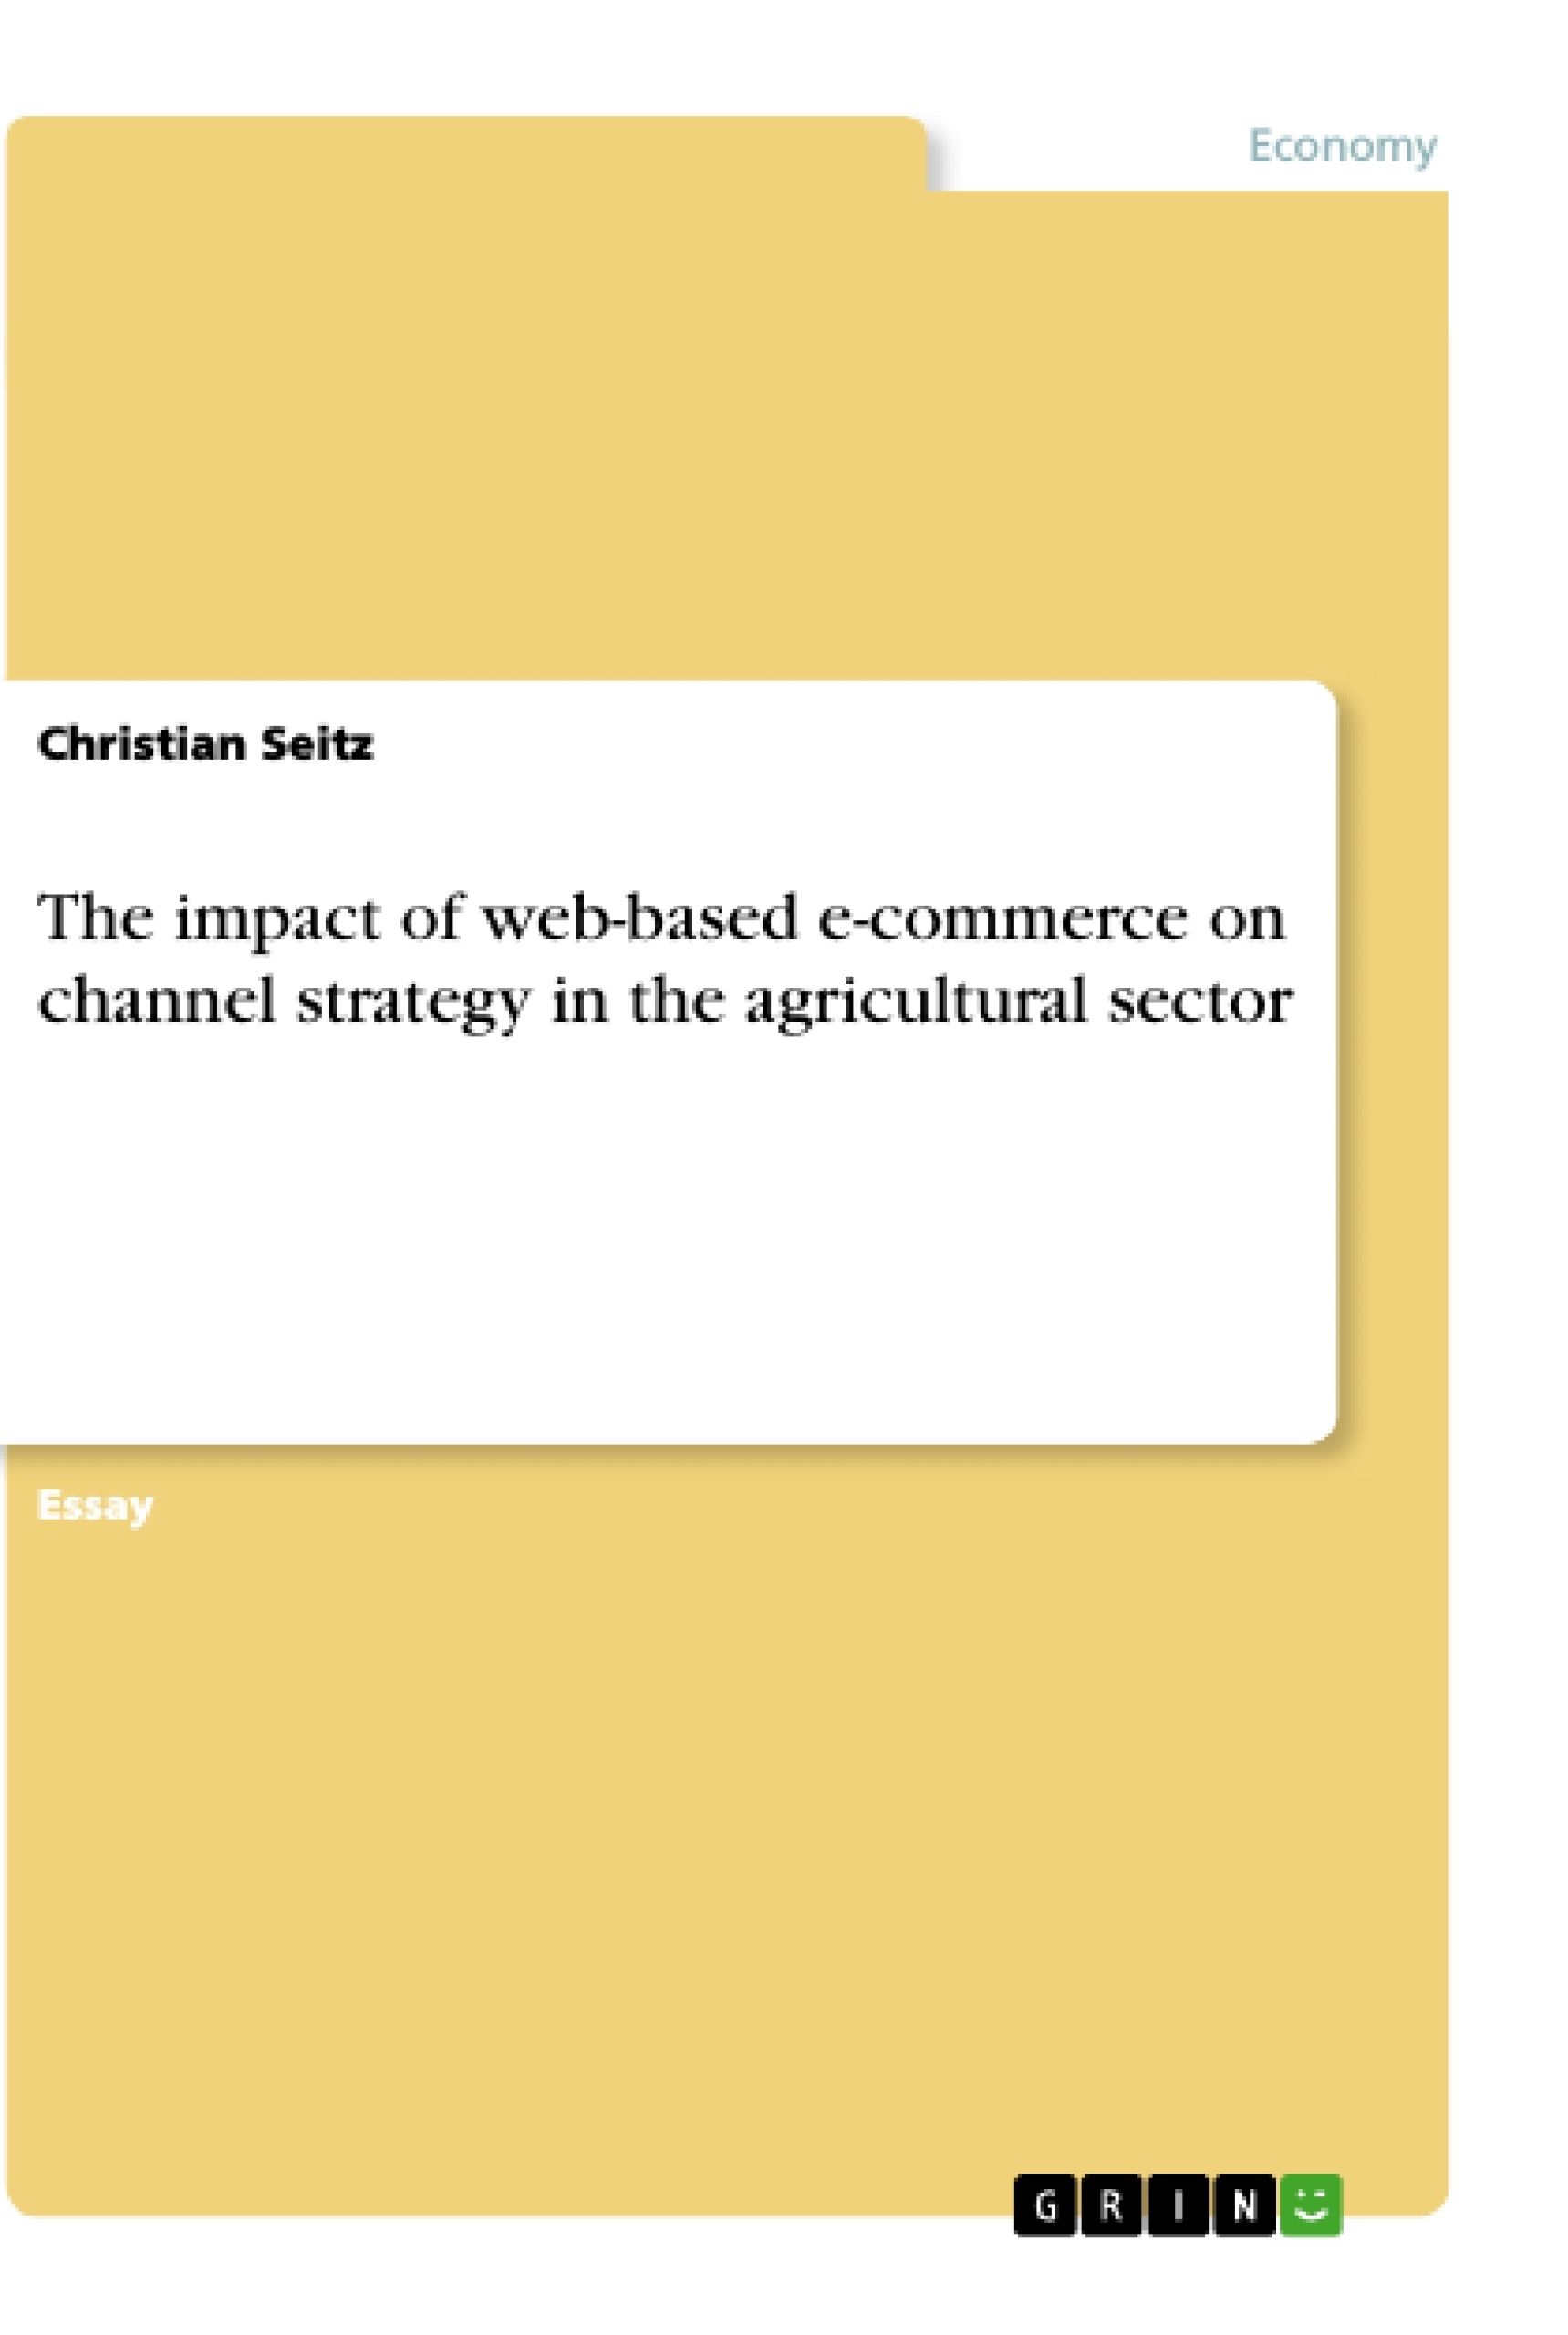 Título: The impact of web-based e-commerce on channel strategy in the agricultural sector